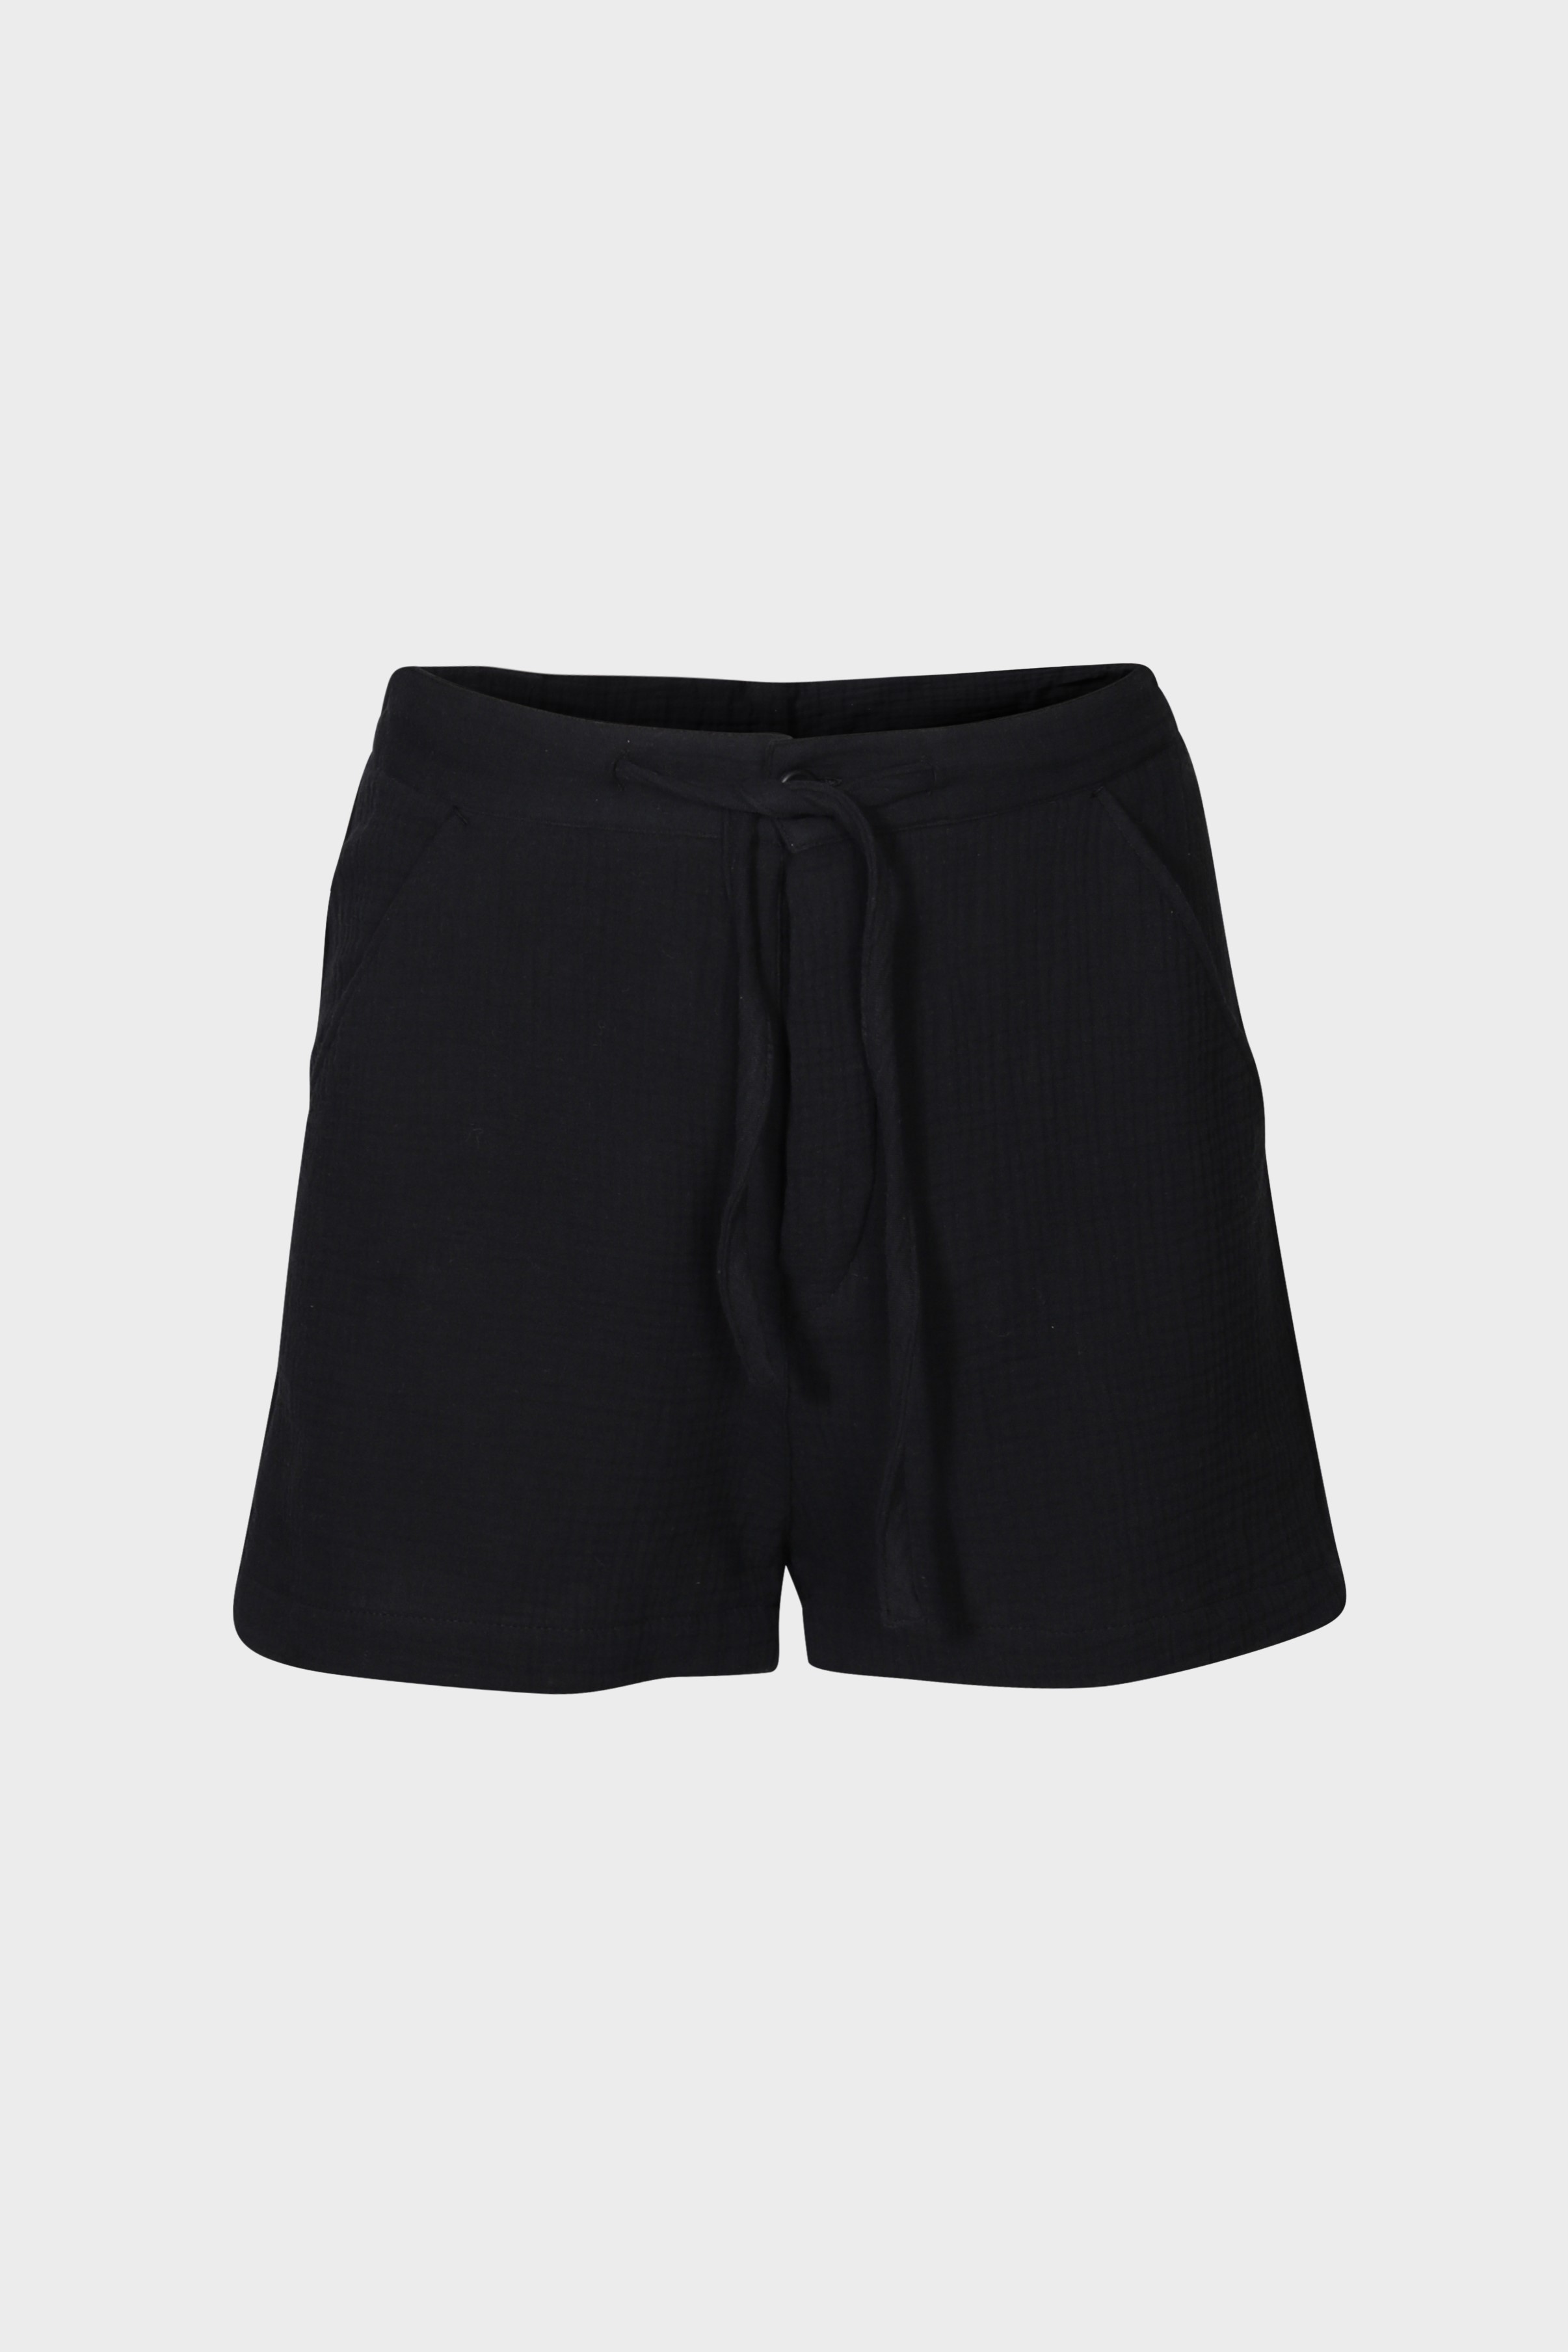 HANNES ROETHER Mousseline Shorts in Black